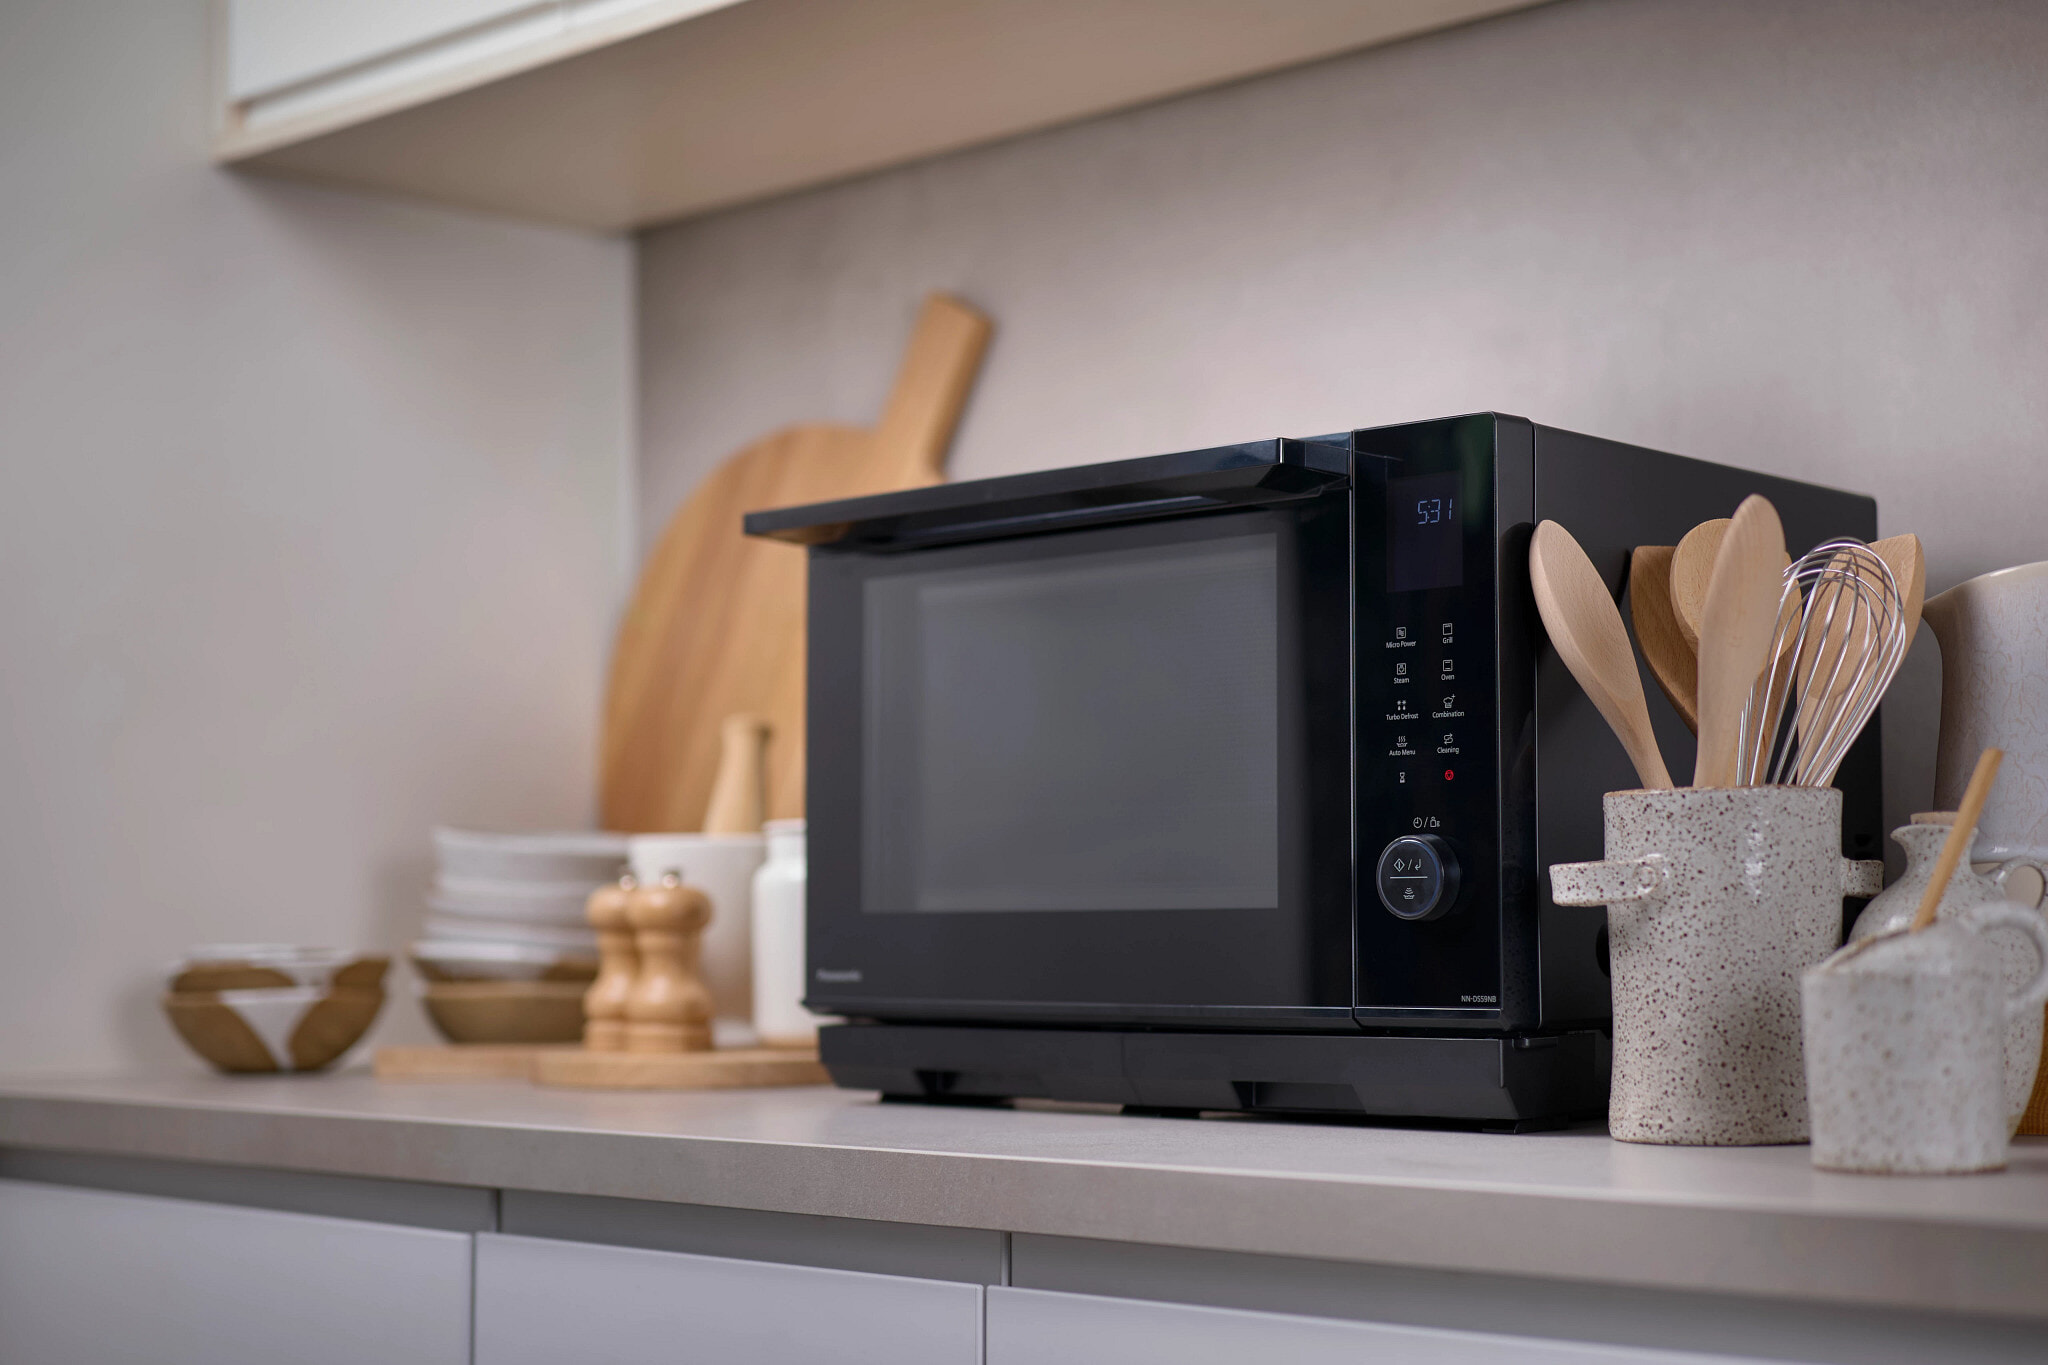 Shiny new Panasonic convection oven sits on a modern kitchen benchtop.